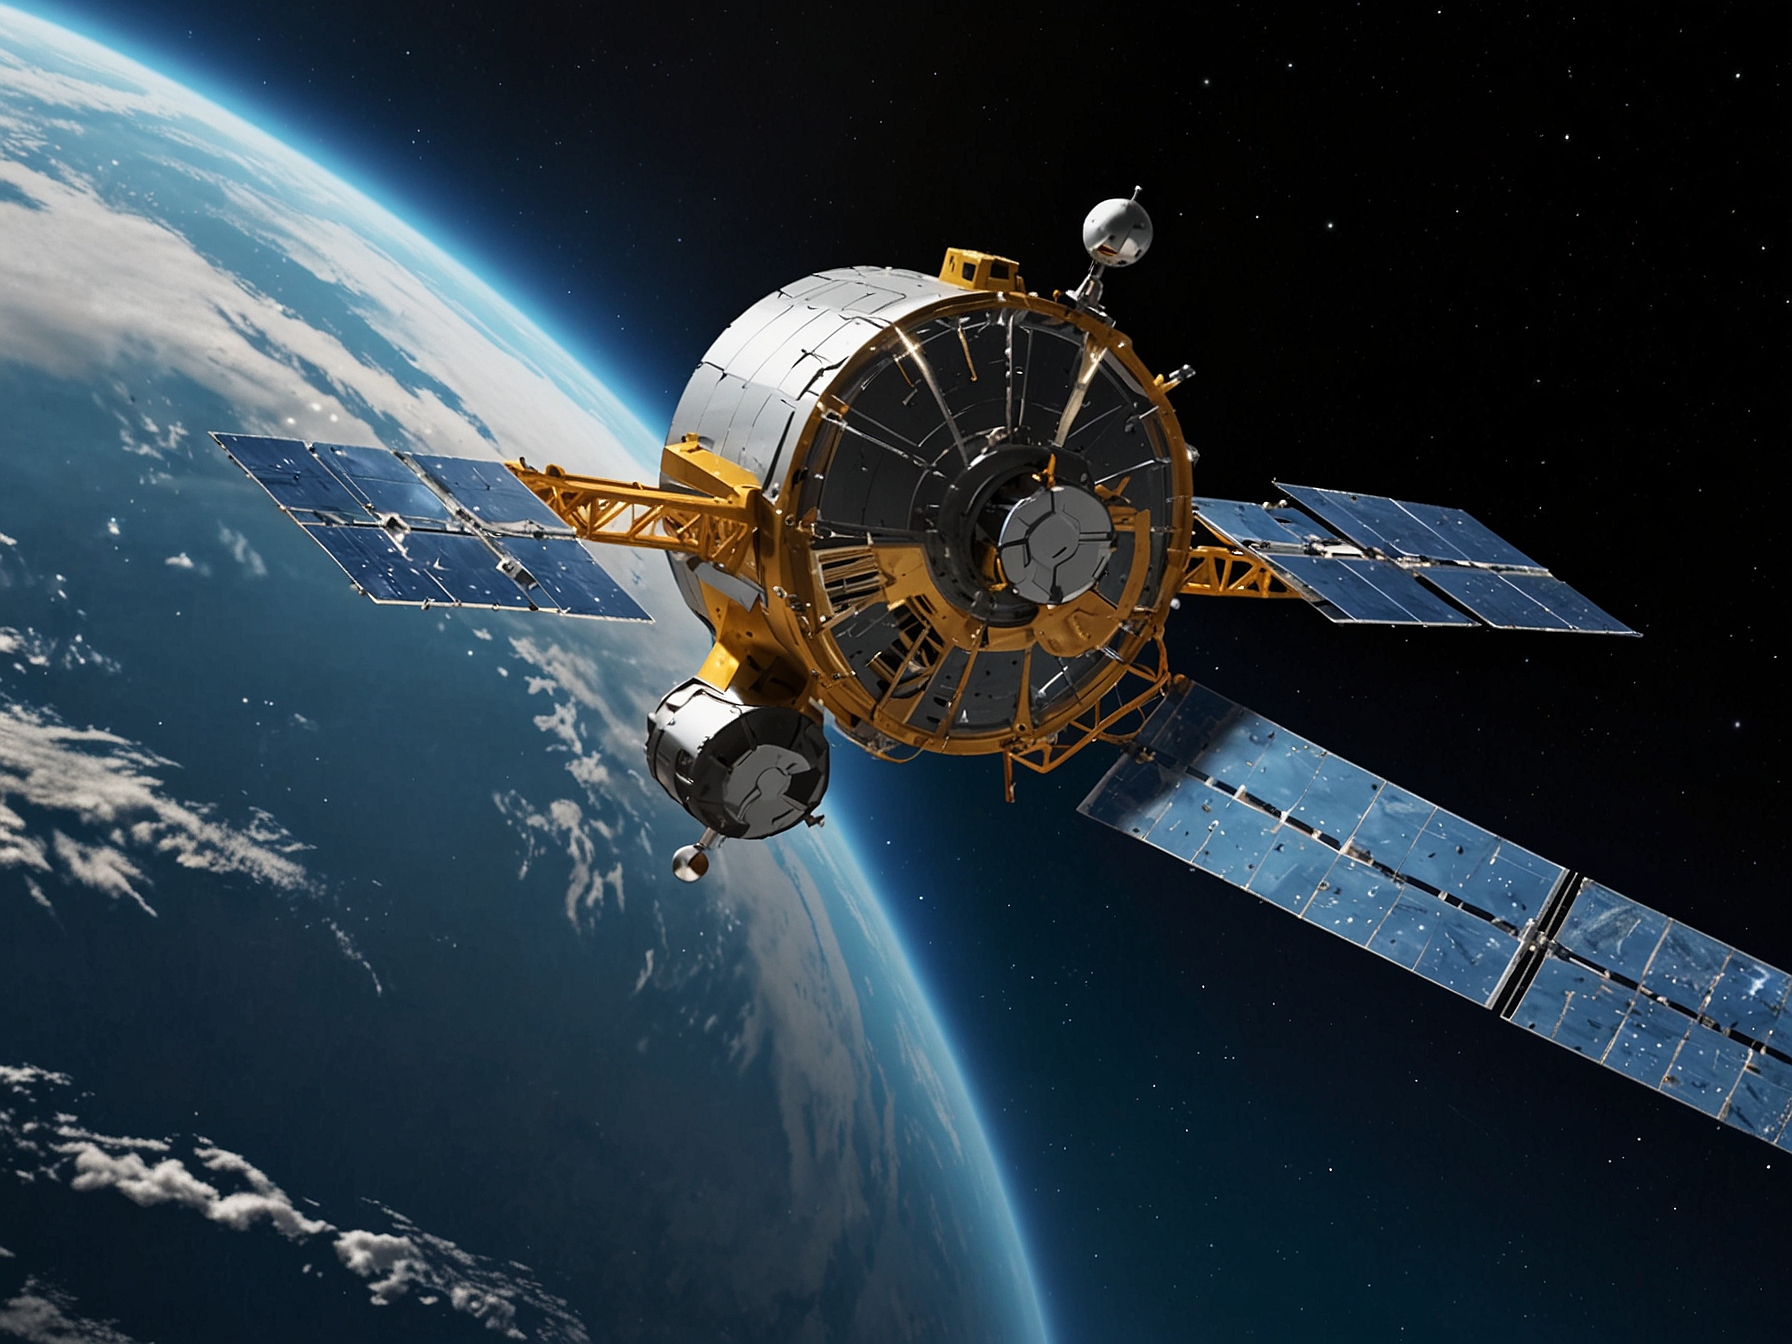 Illustration of Astroscale's ELSA-d mission, featuring a servicer satellite capturing a client satellite. This demonstration showcases the technical efforts and innovations aimed at mitigating space debris in Earth's orbit.